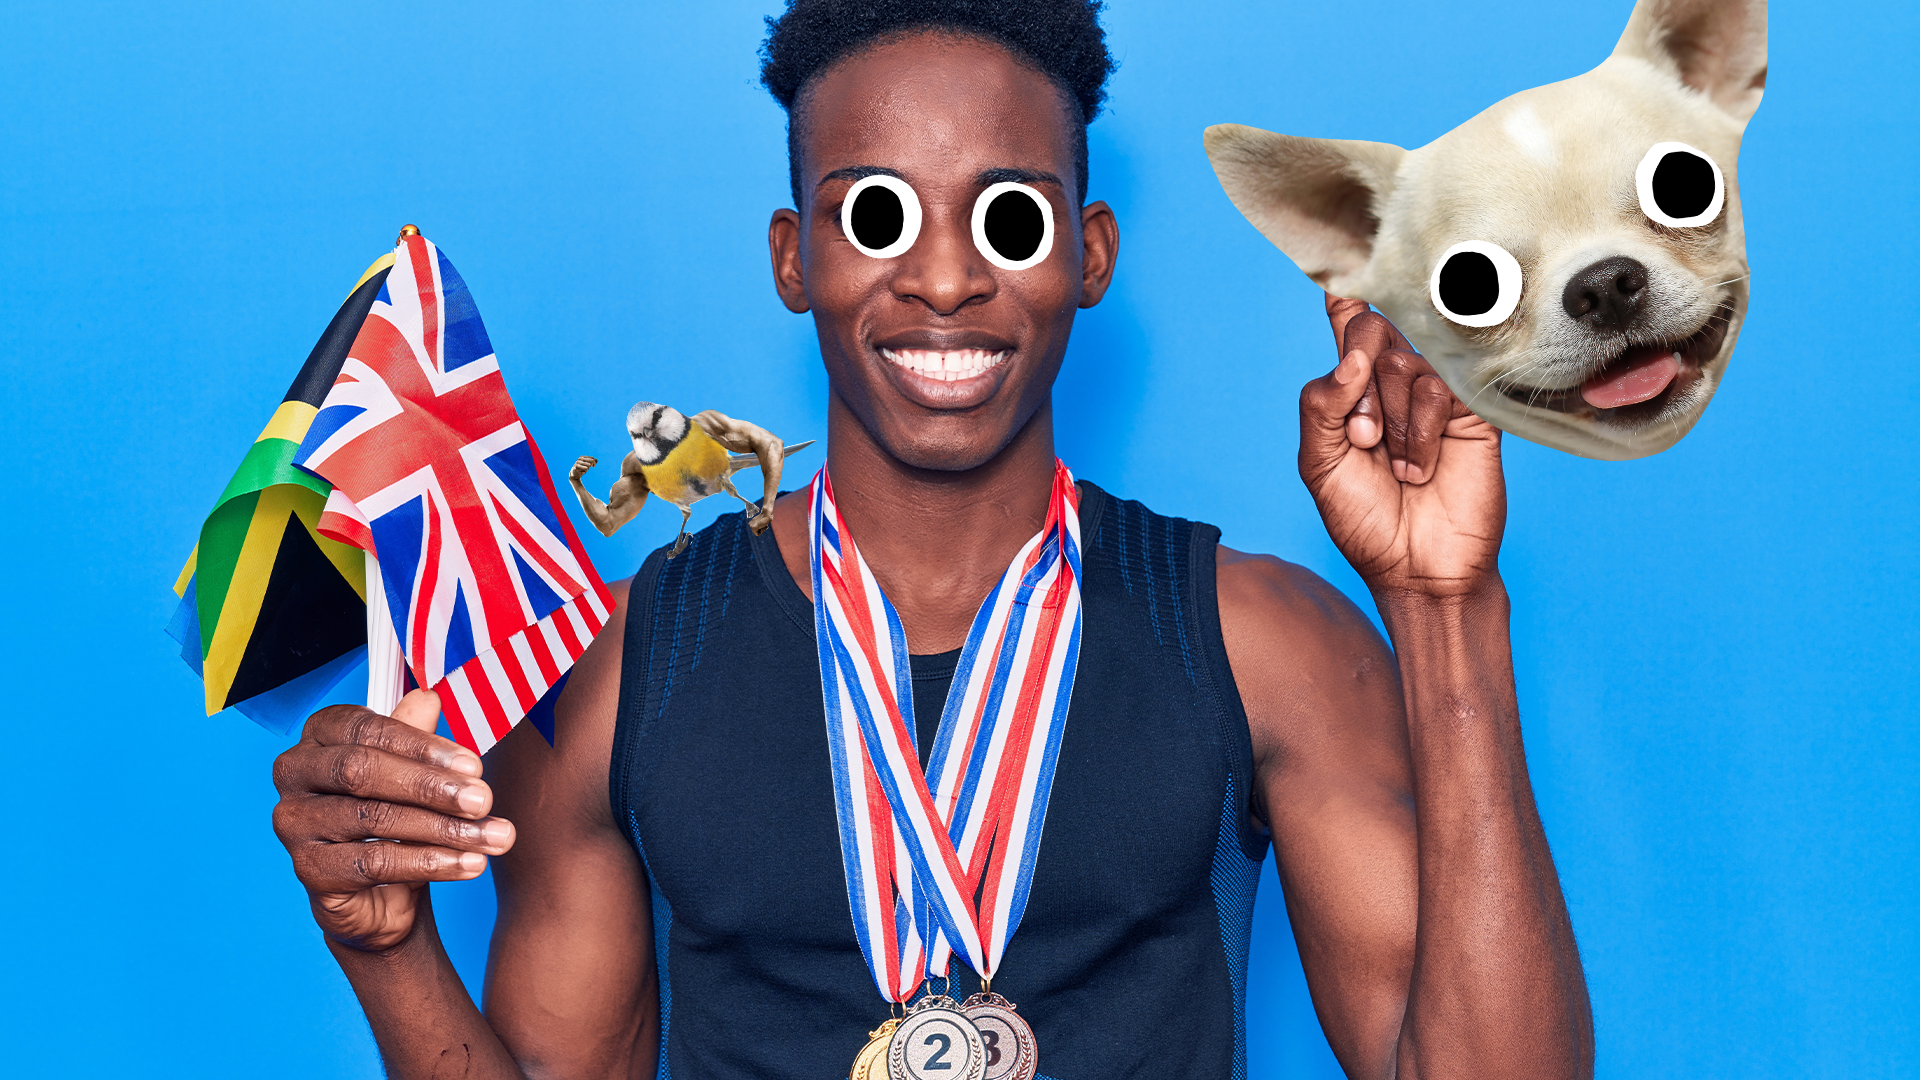 Man holding flags and medal on blue background with derpy dog face